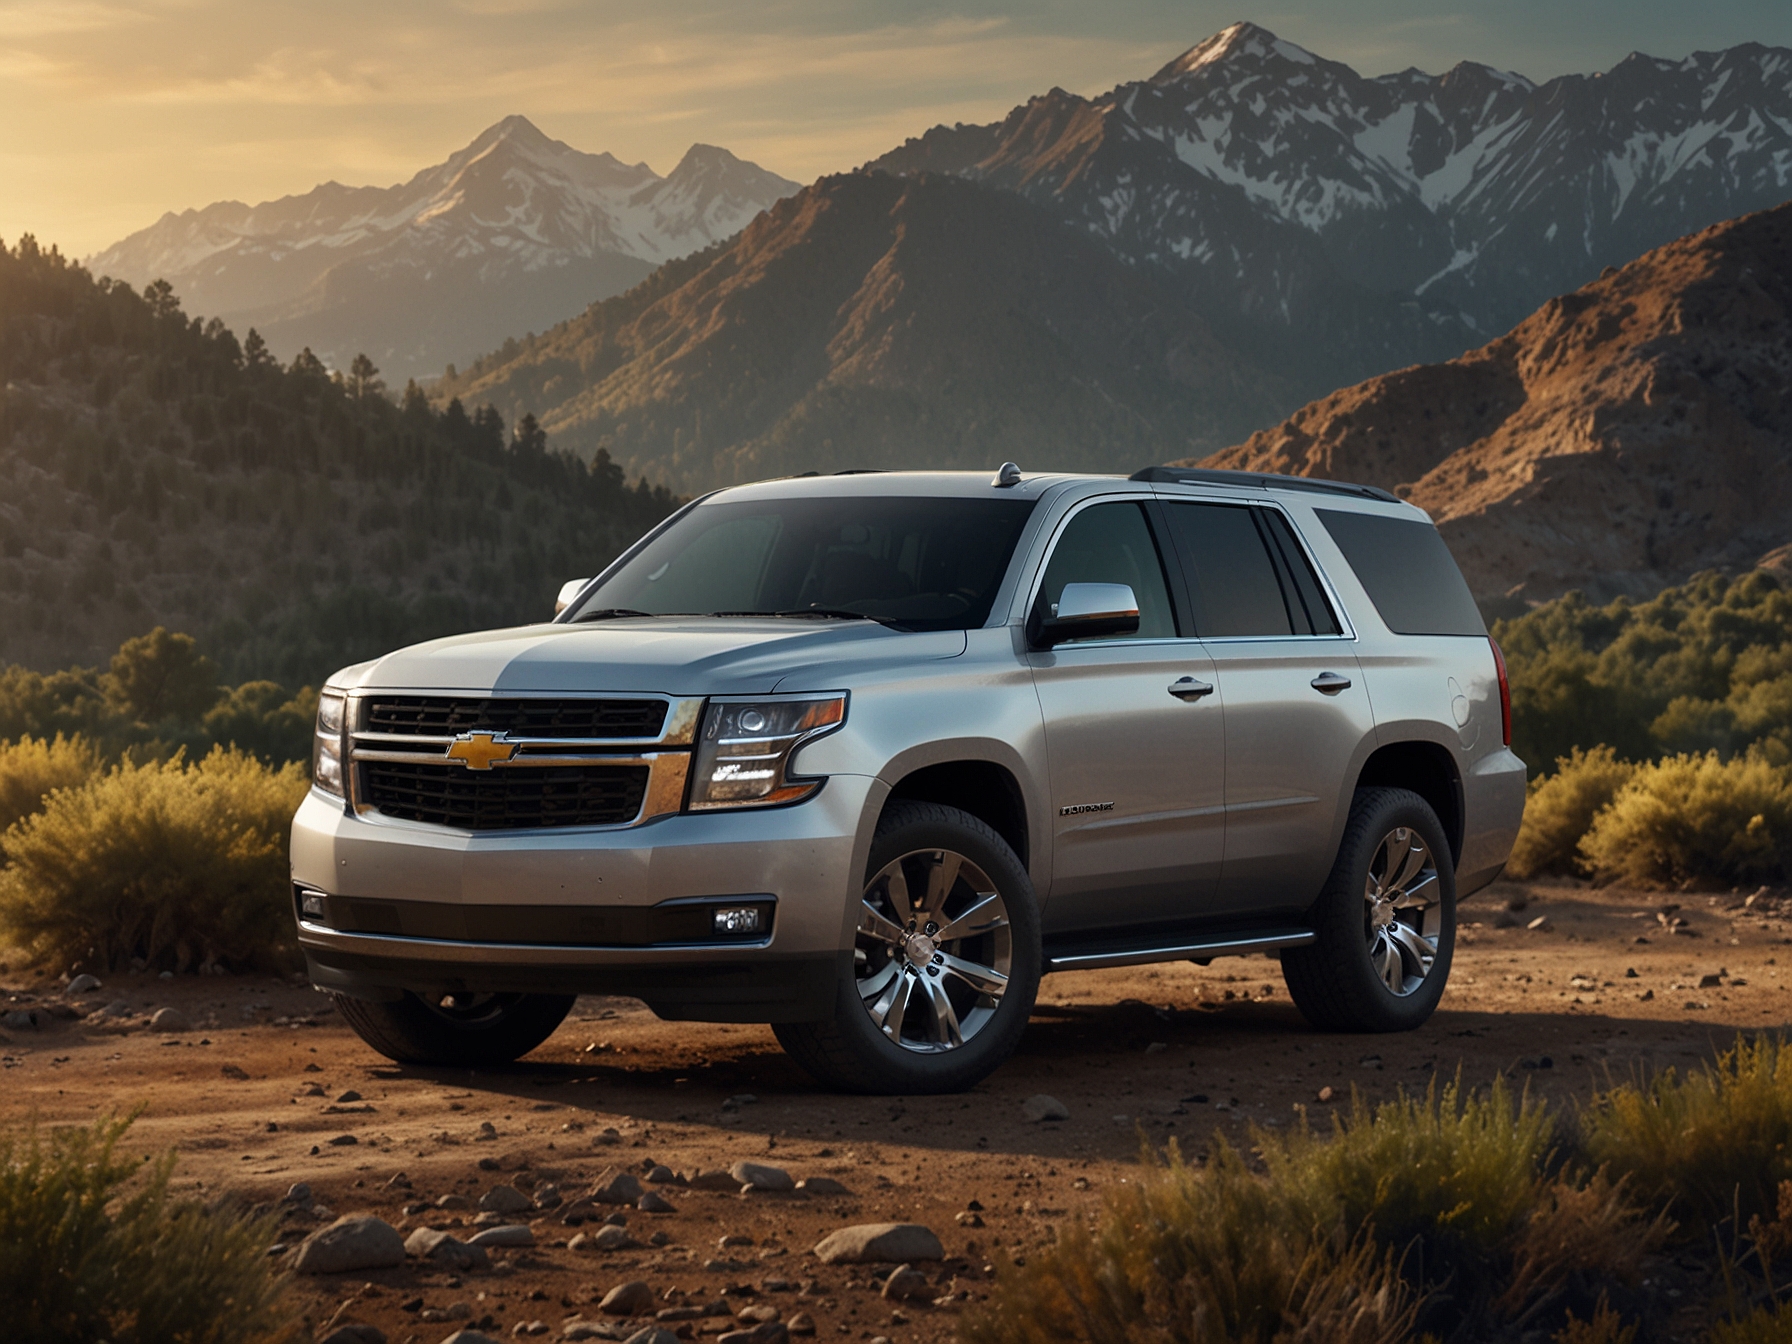 A 2024 Chevrolet Tahoe is shown on a rugged terrain, highlighting its spacious interior and powerful V8 engine. The image emphasizes the vehicle's advanced tech features and robust design.